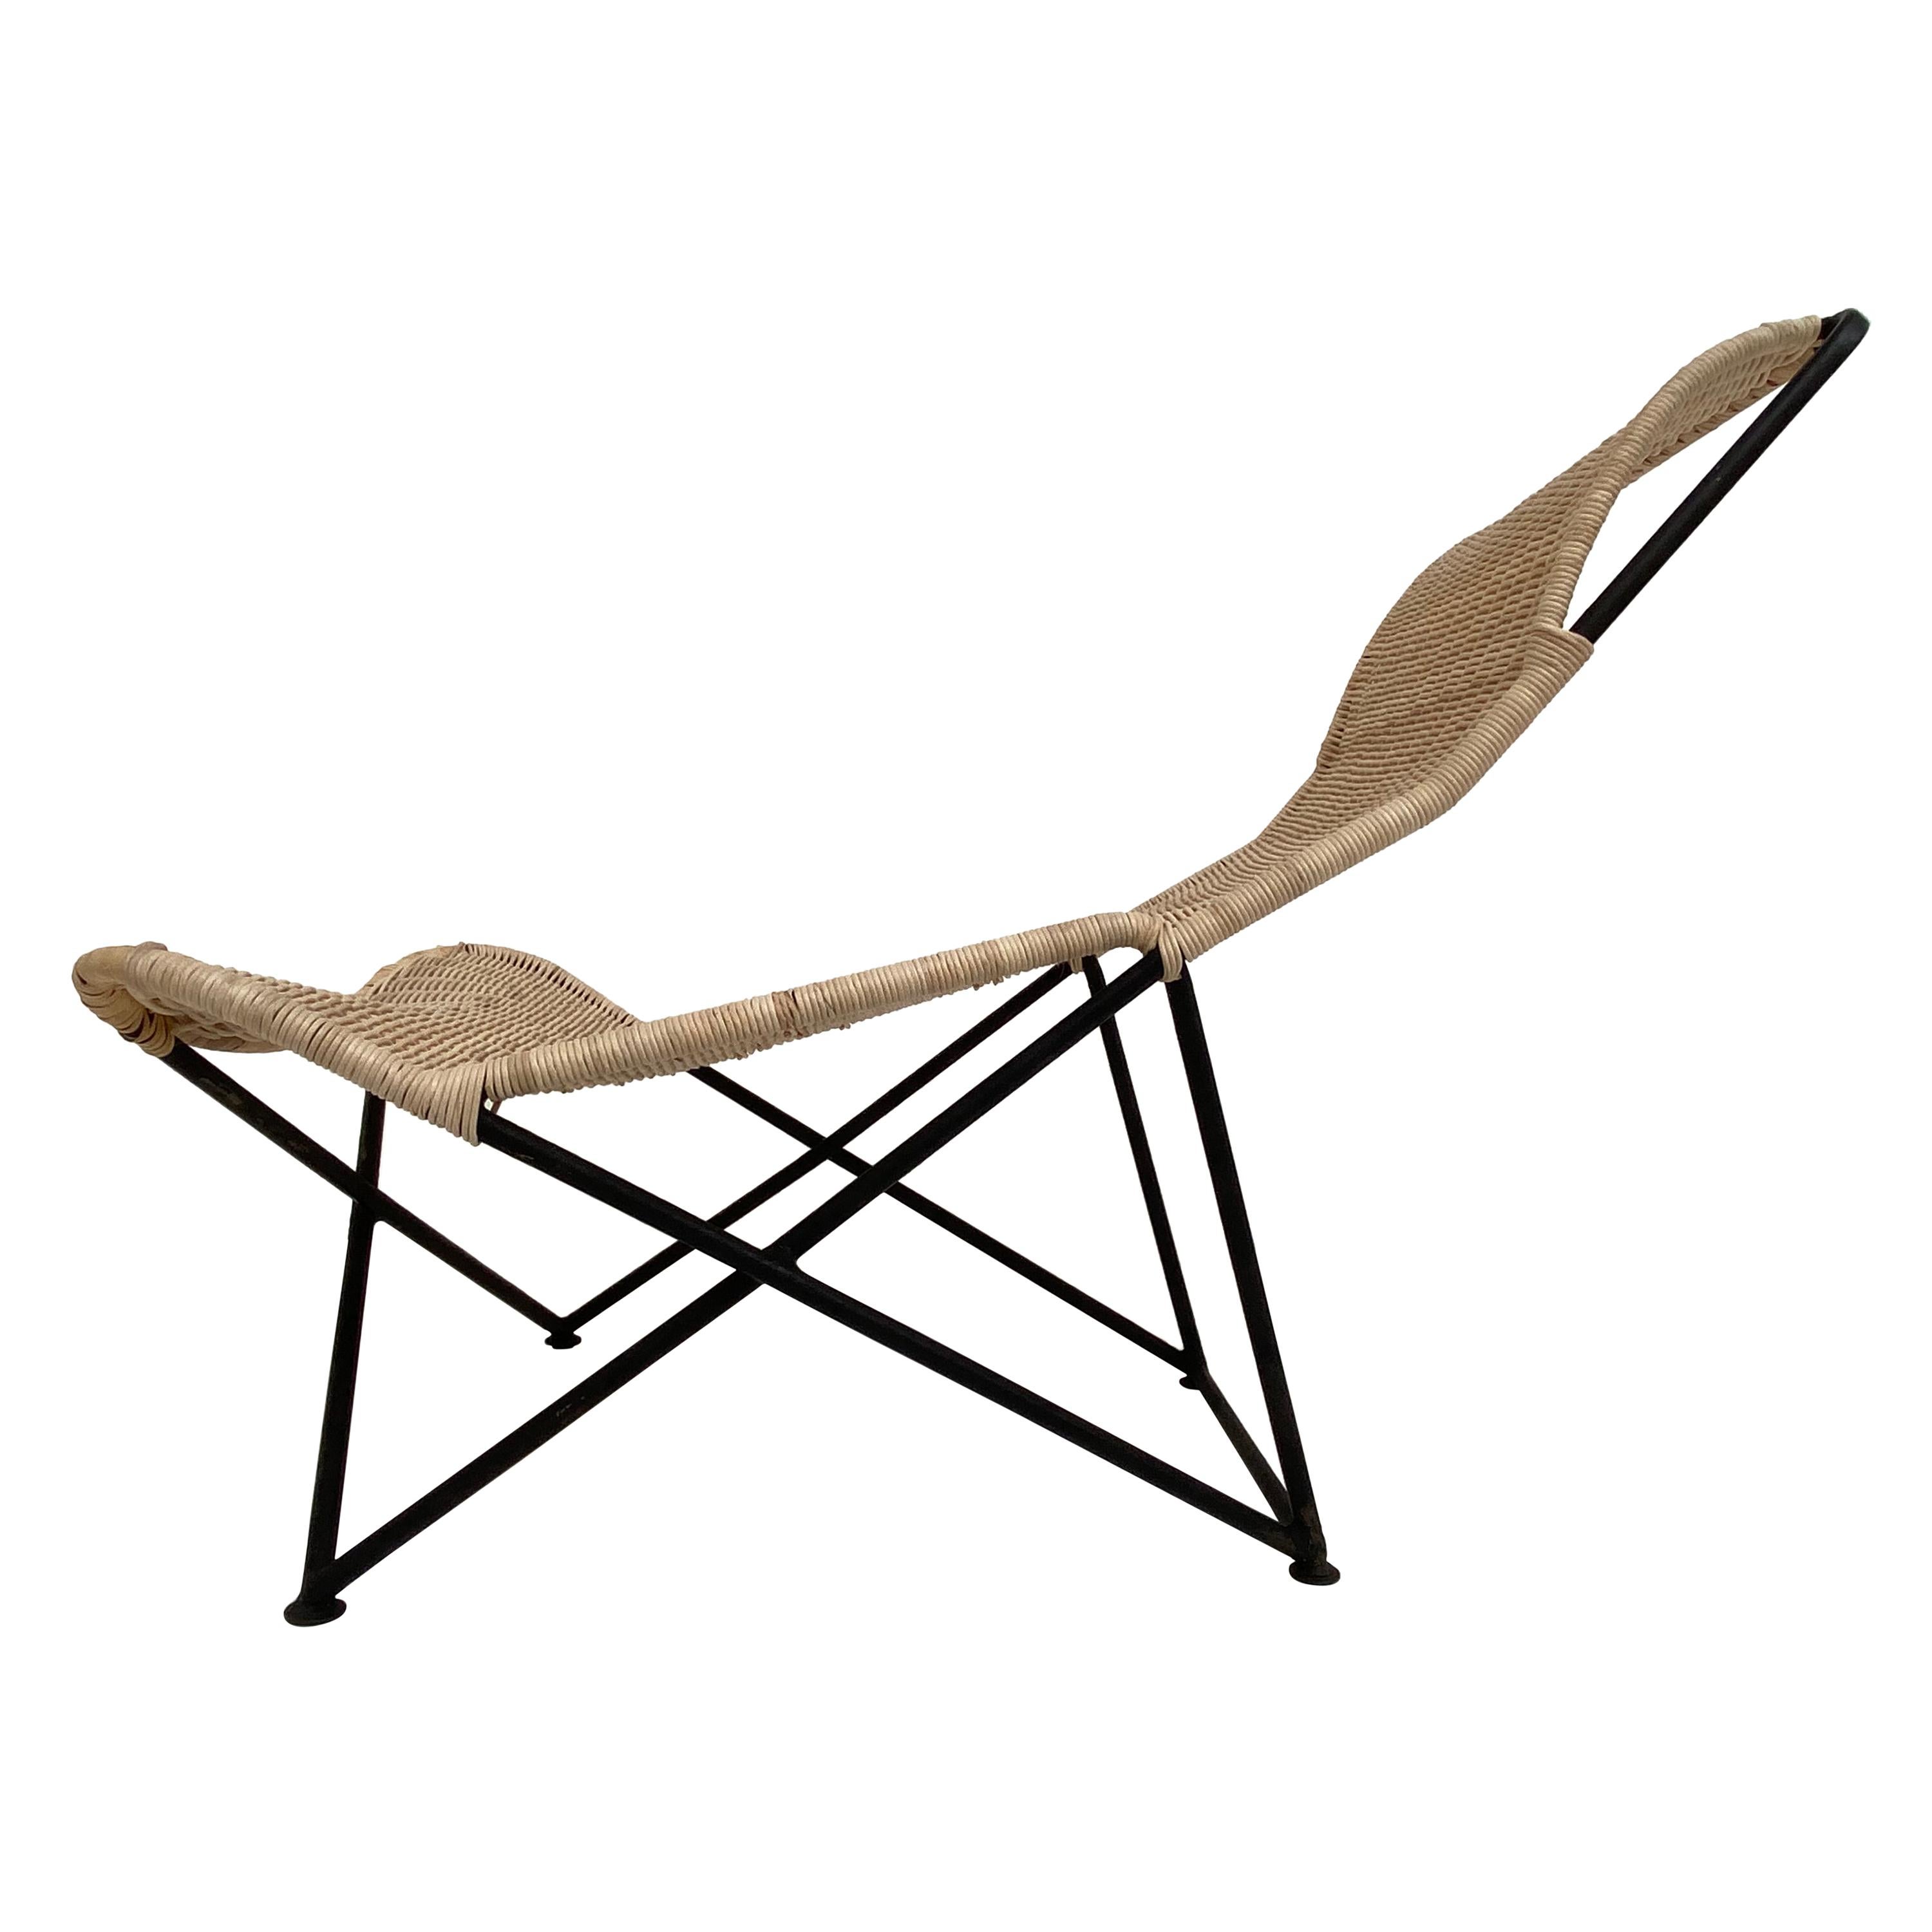 Stunning Sculptural Form Wicker Chaise Attributed to Raoul Guys, France, 1950's